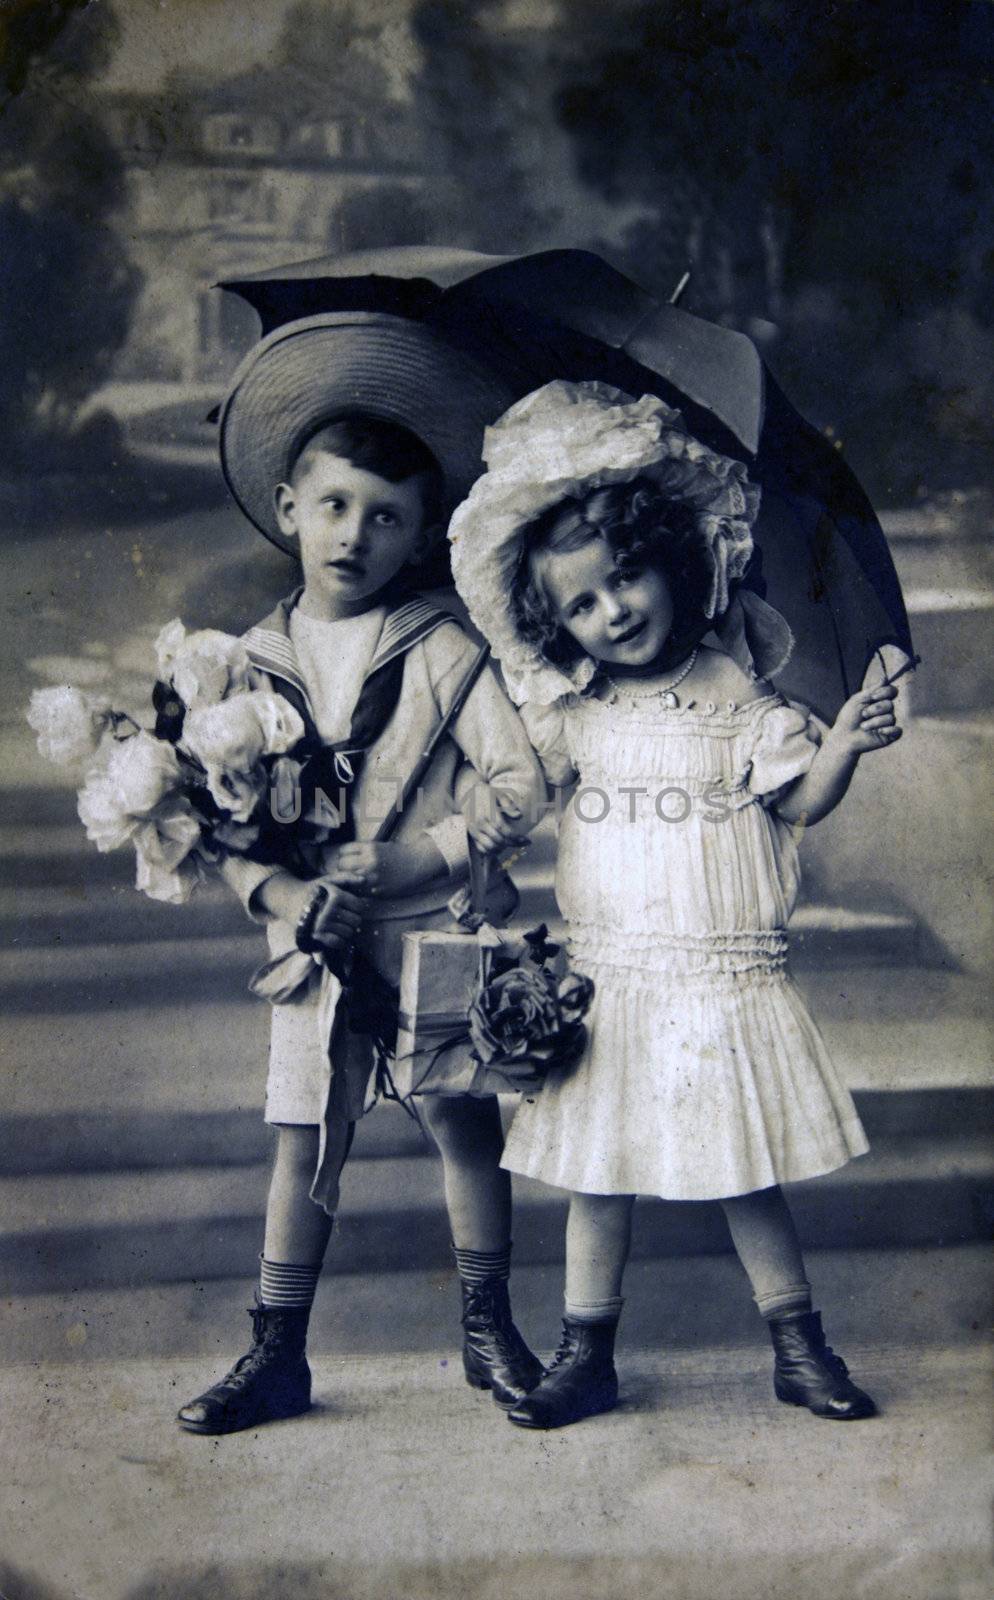 GERMANY - CIRCA 1909: Postcard printed in the Germany shows boy and girl under an umbrella, circa 1909